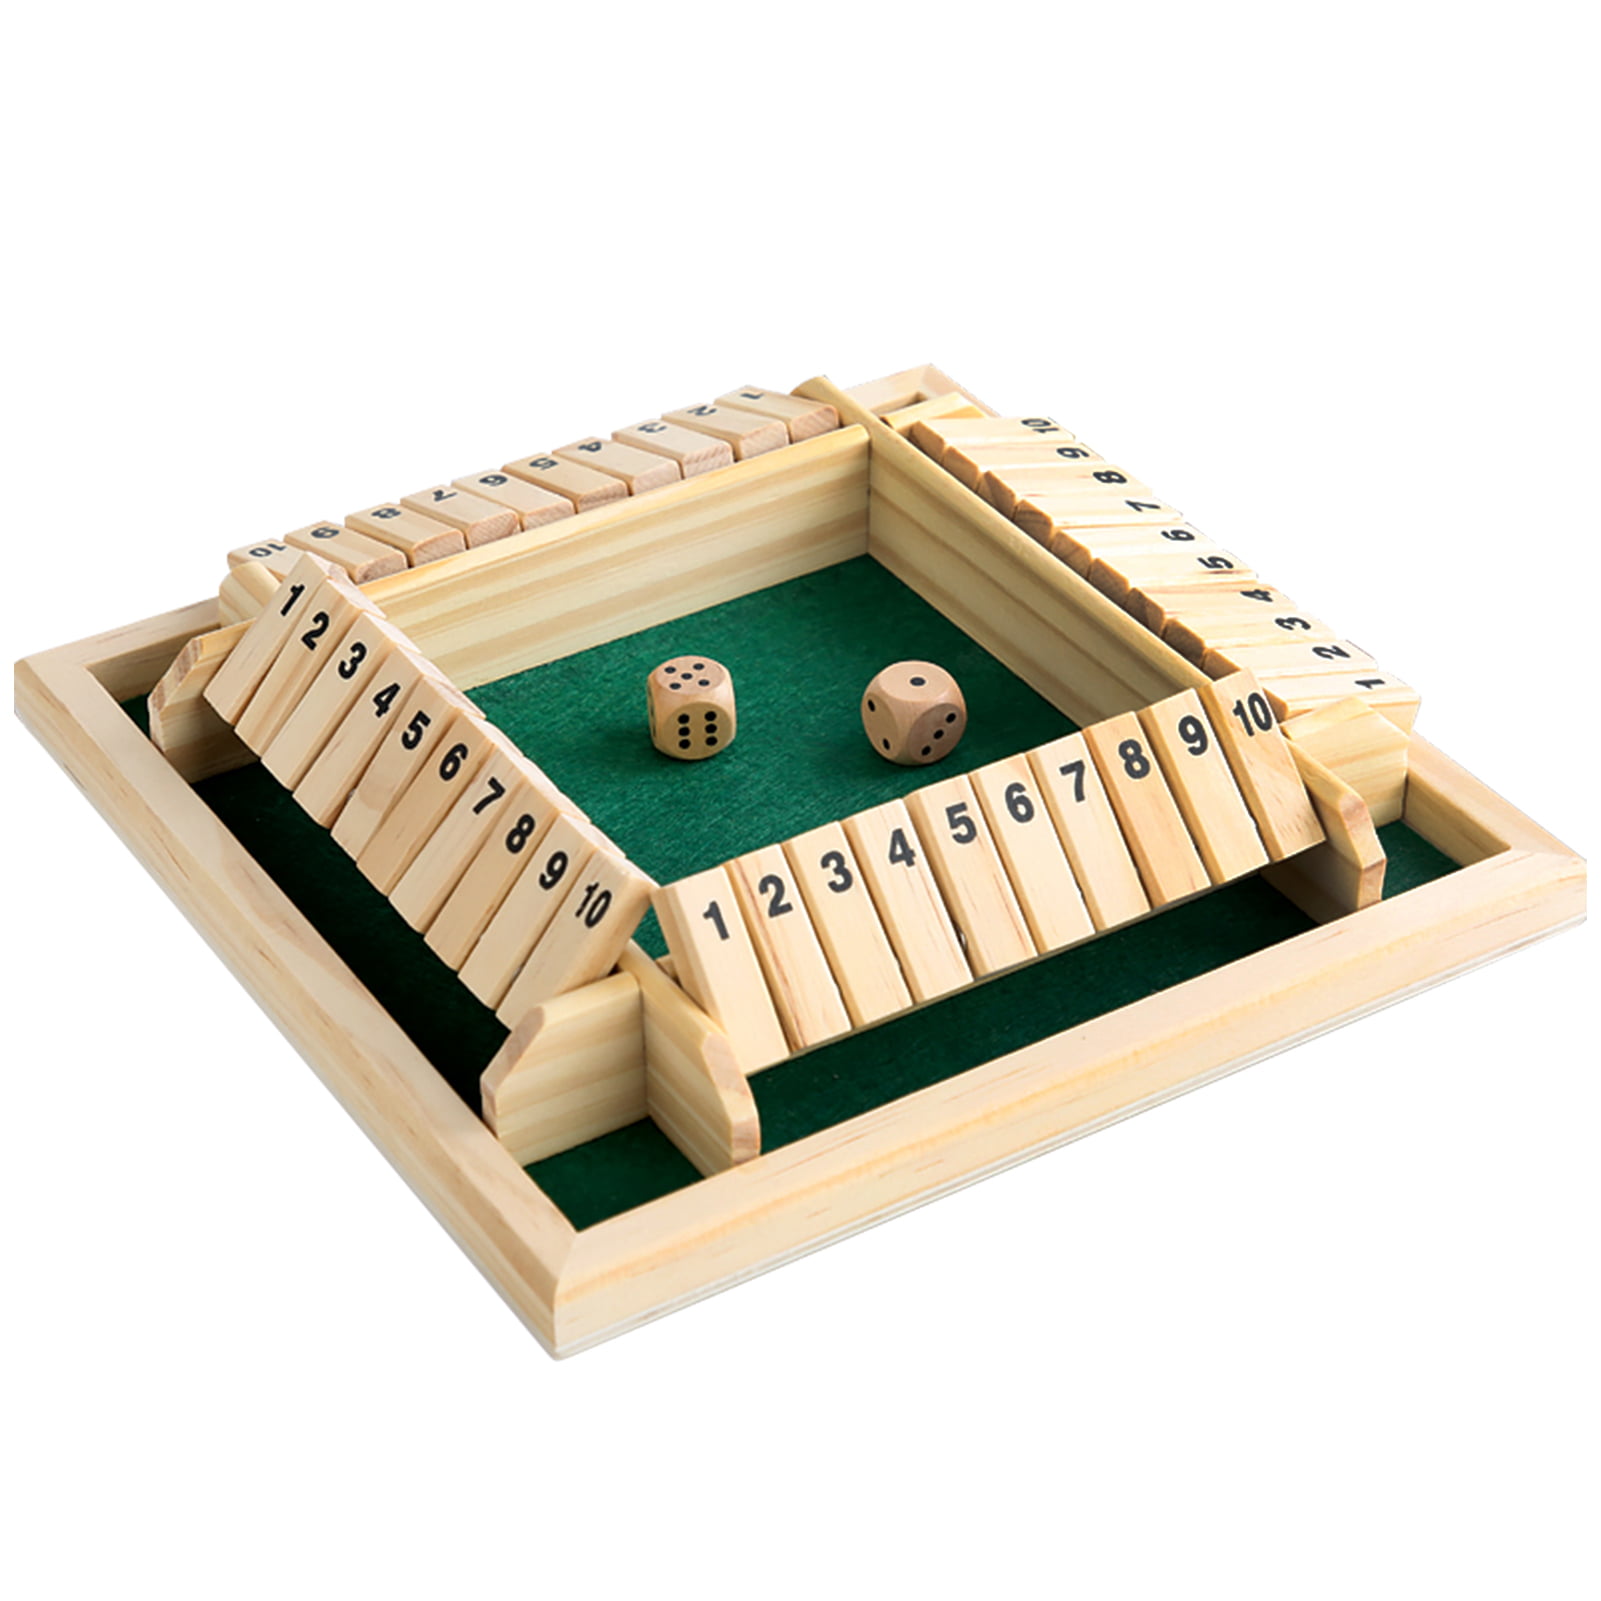 Board Game for Kids & Adults 2-4 Players Classics Family Educational Learning Toy CNMF Shut The Box Wooden Board Dice Game 